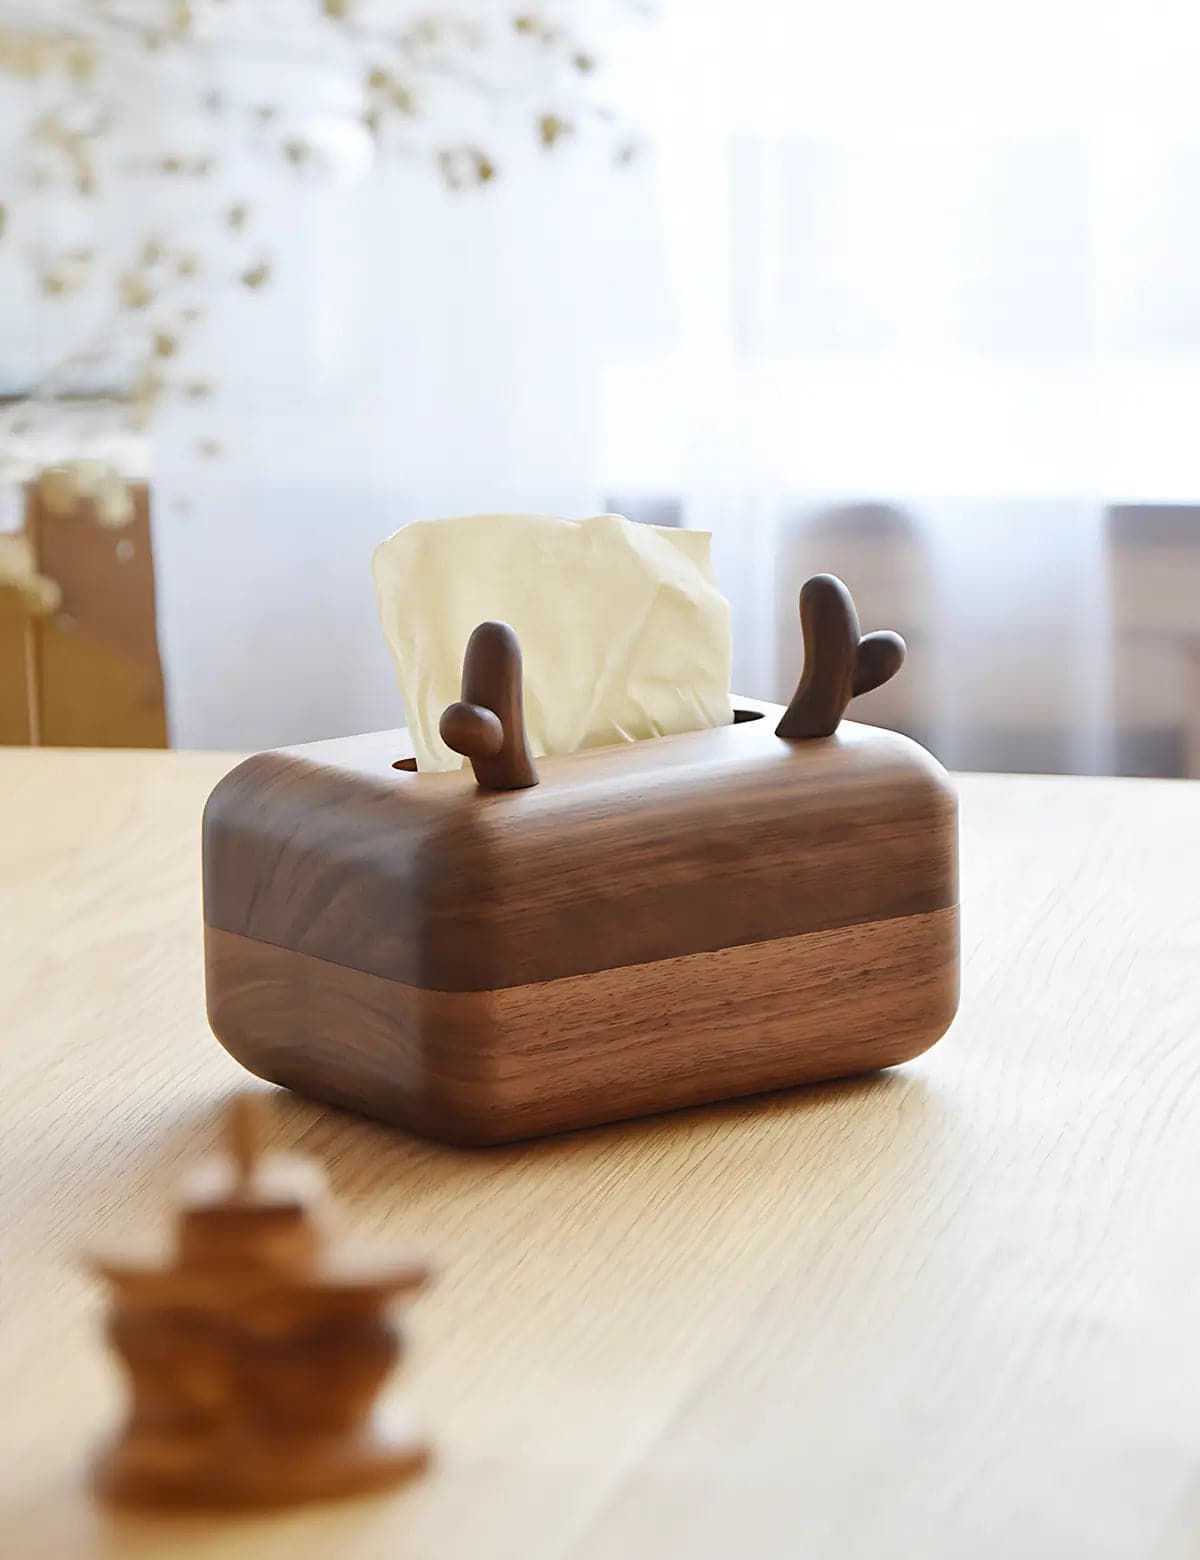 Wooden-Deer-Antler-Tissue-Box-Decorative-Home-Accessory-02